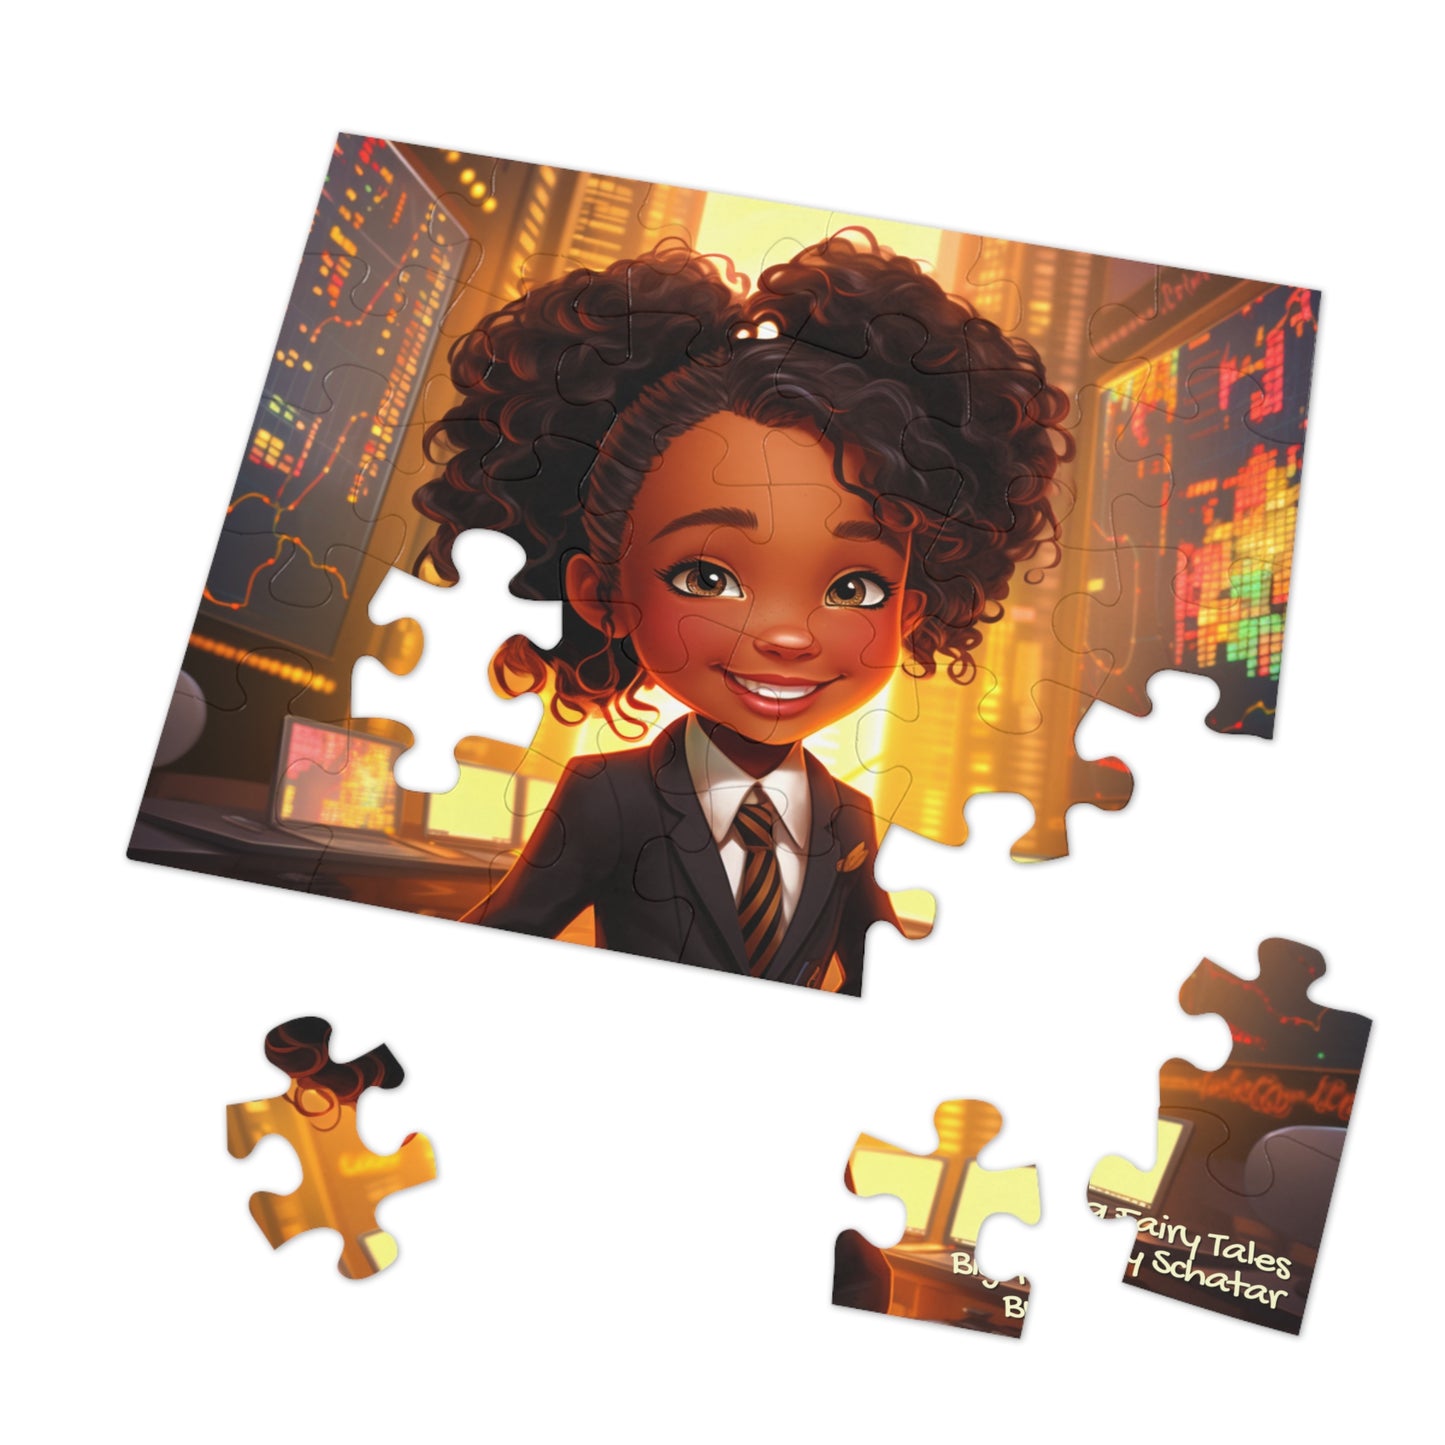 Wall Street Executive - Big Little Professionals Puzzle 12 From Big Fairy Tales By Schatar